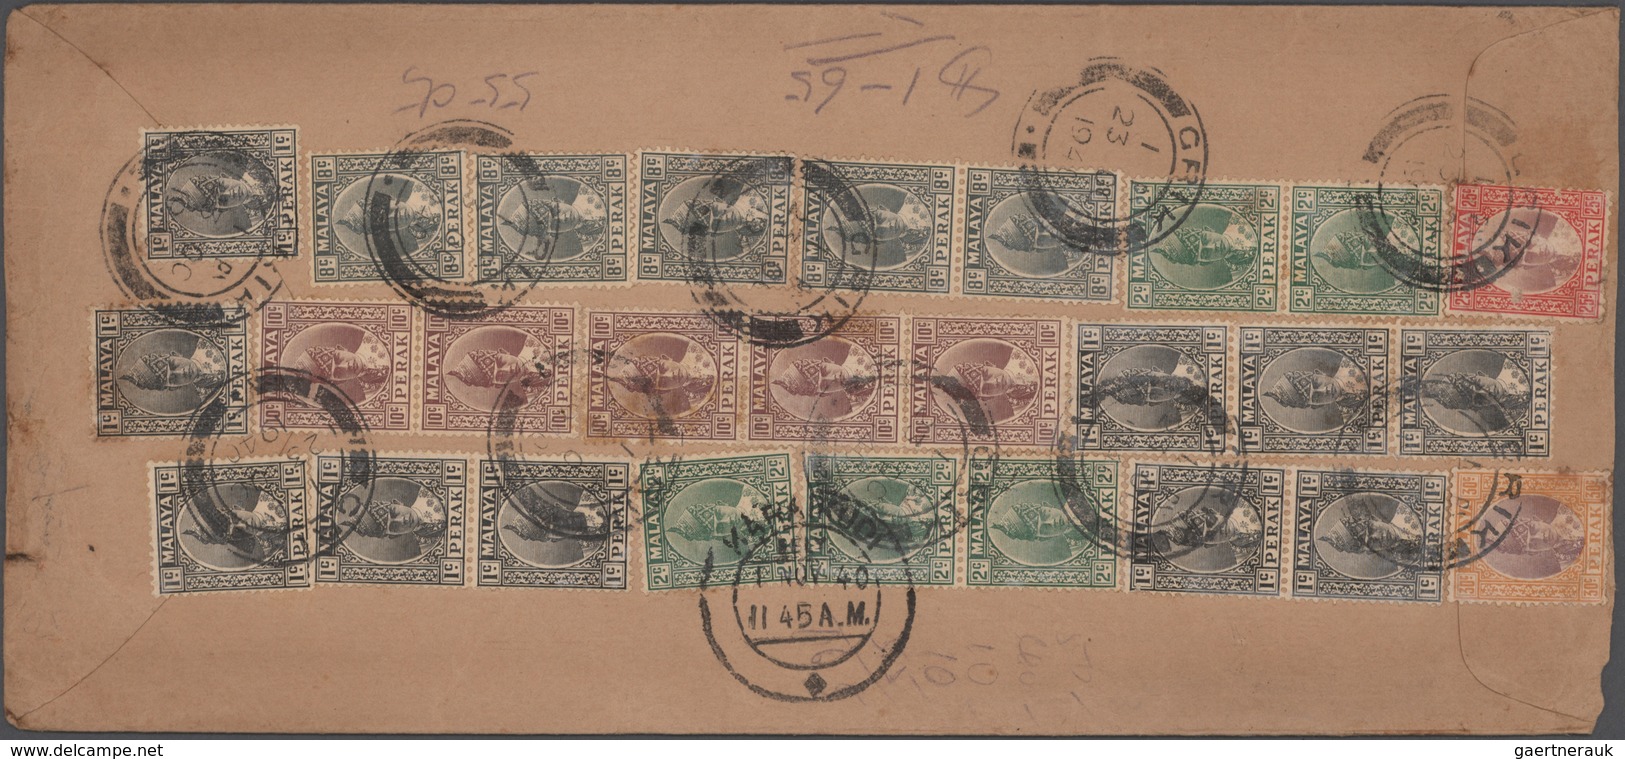 Malaiische Staaten - Perak: 1890's-1960's ca.: Accumulation of about 2500 covers from various post o